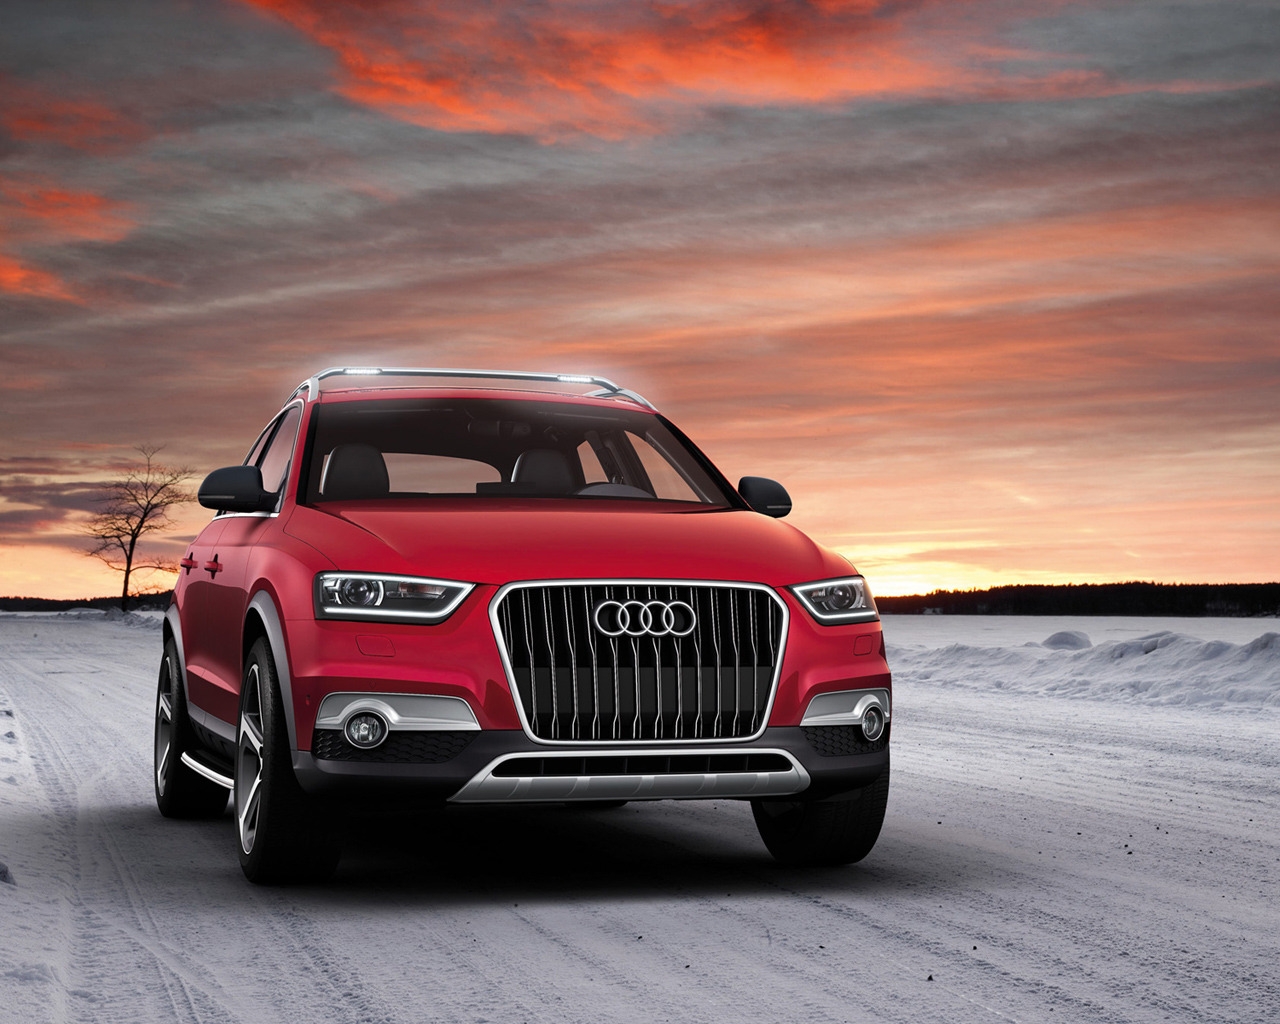 2012 Audi Q3 Vail Front for 1280 x 1024 resolution